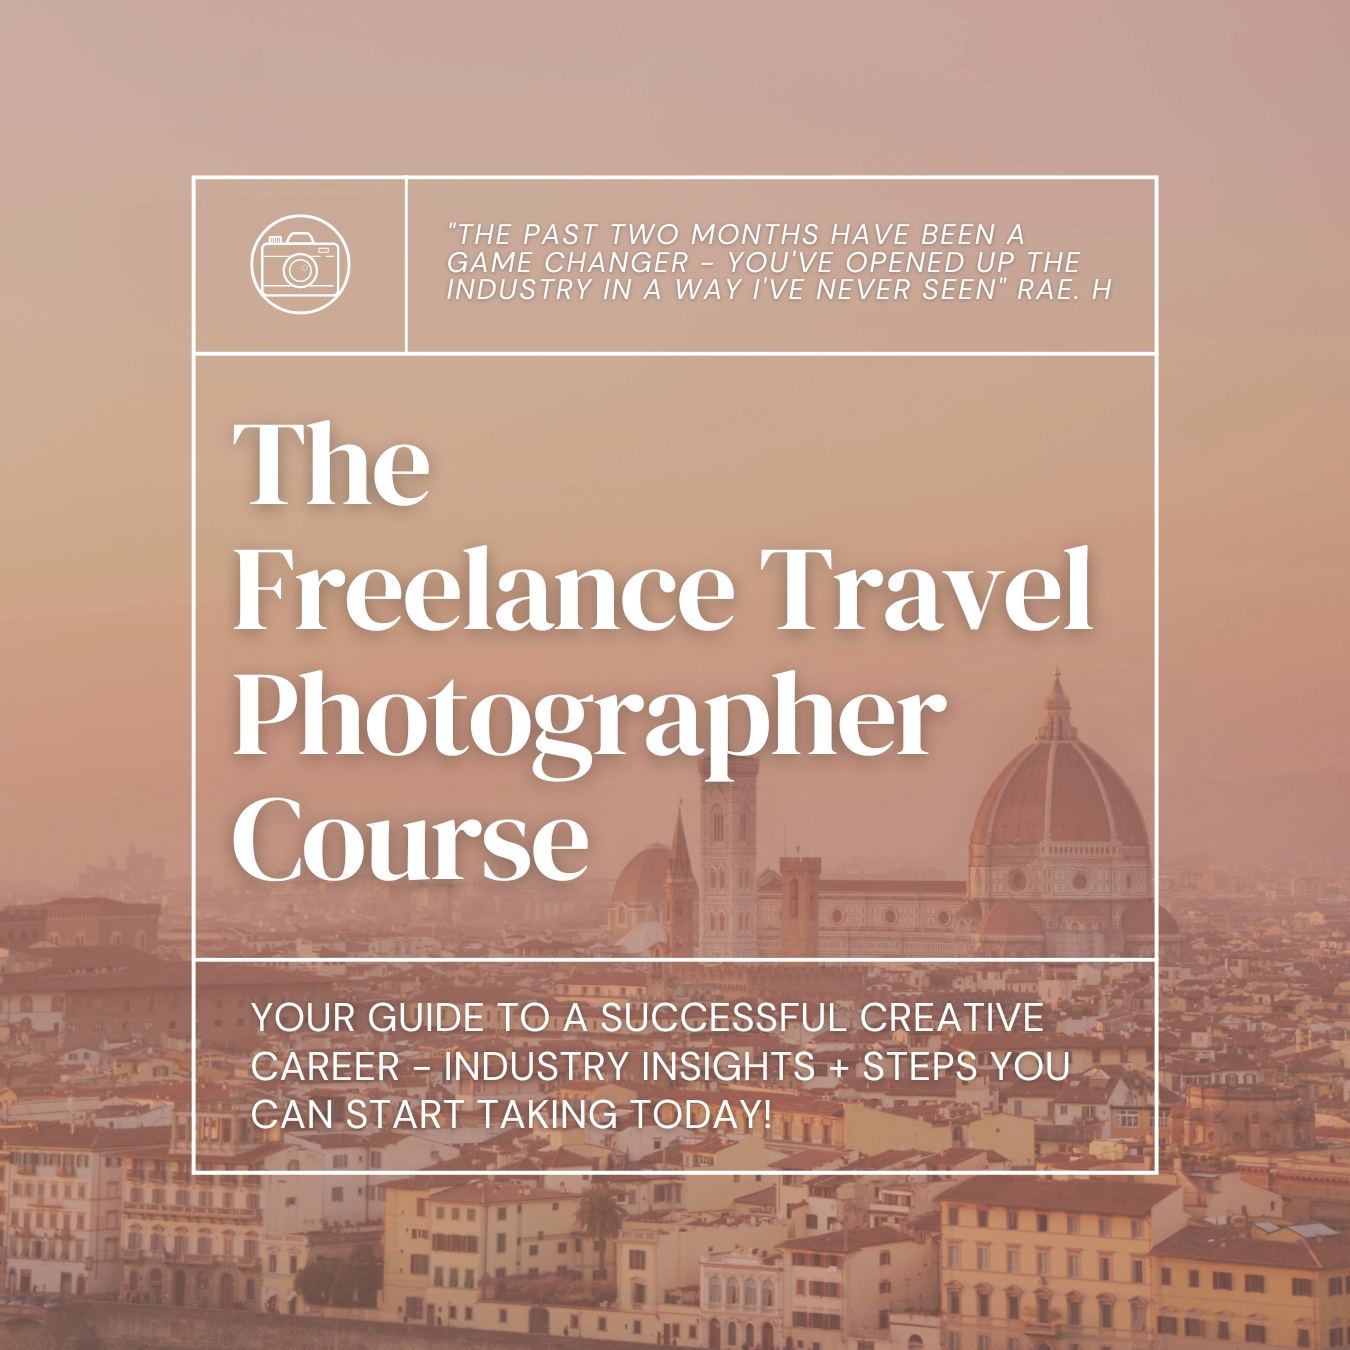 travel photography business ideas